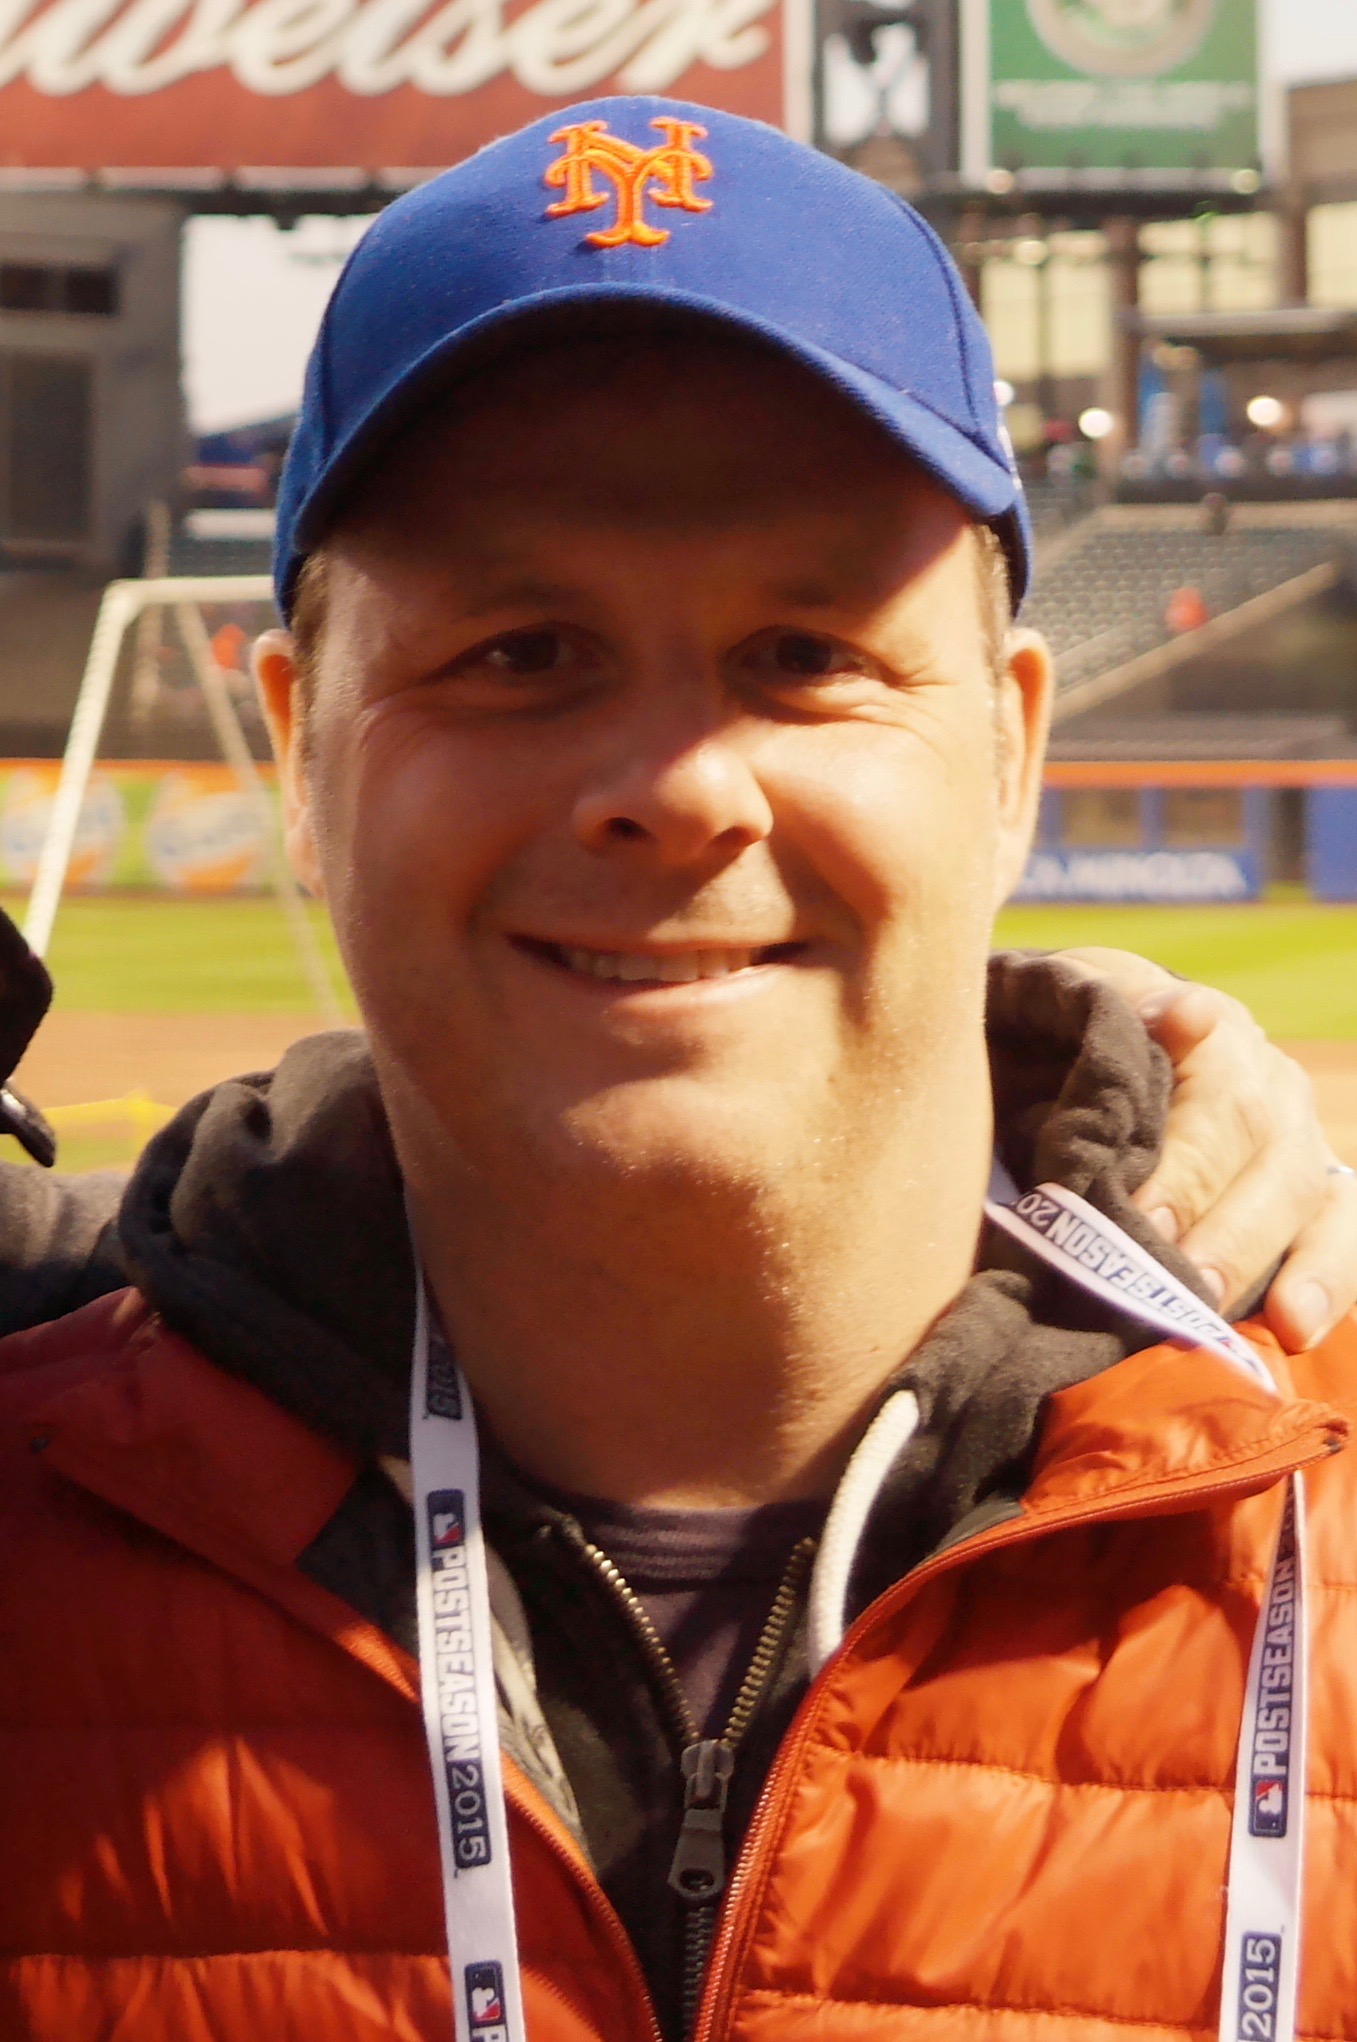 Iacono at [[Citi Field]] in New York City during the [[2015 National League Championship Series|NLCS Game 2]] on [[Chicago Cubs]] vs. [[New York Mets]] on October 18, 2015